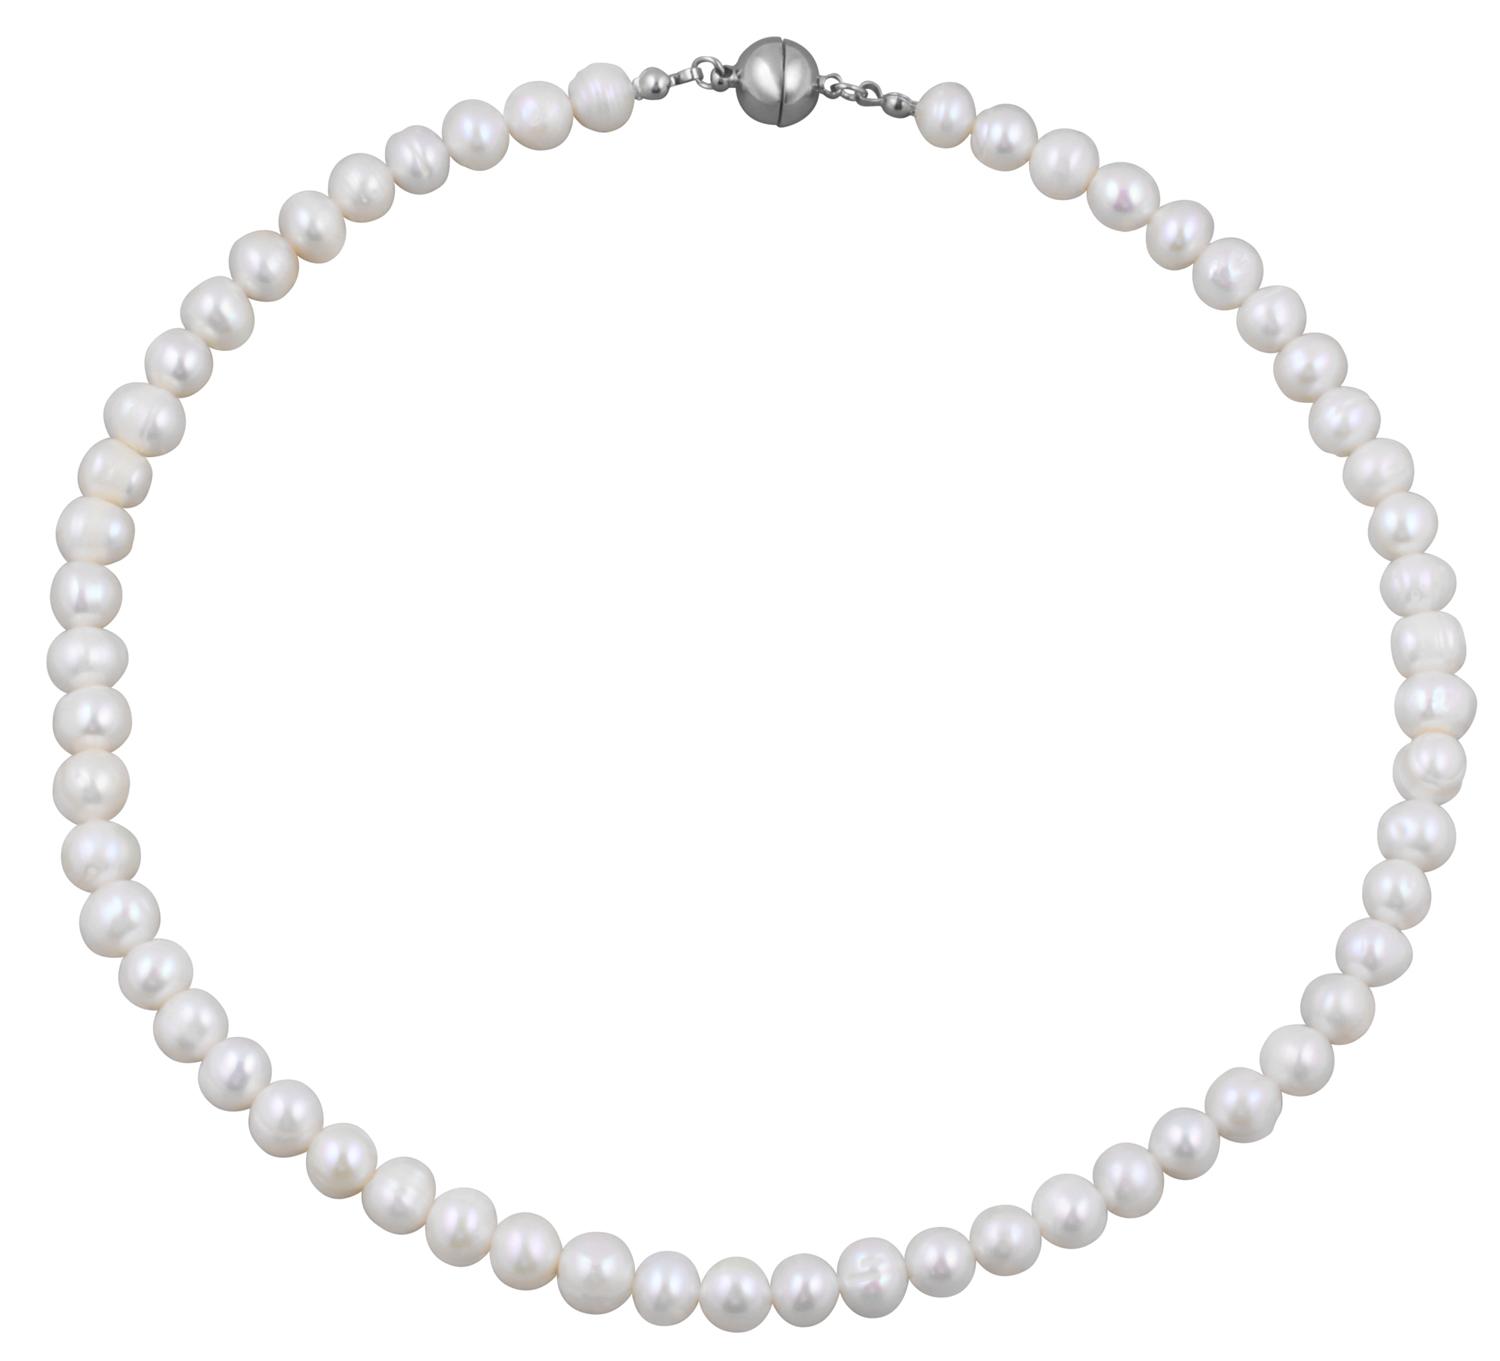 Necklace - Many Water Pearls 